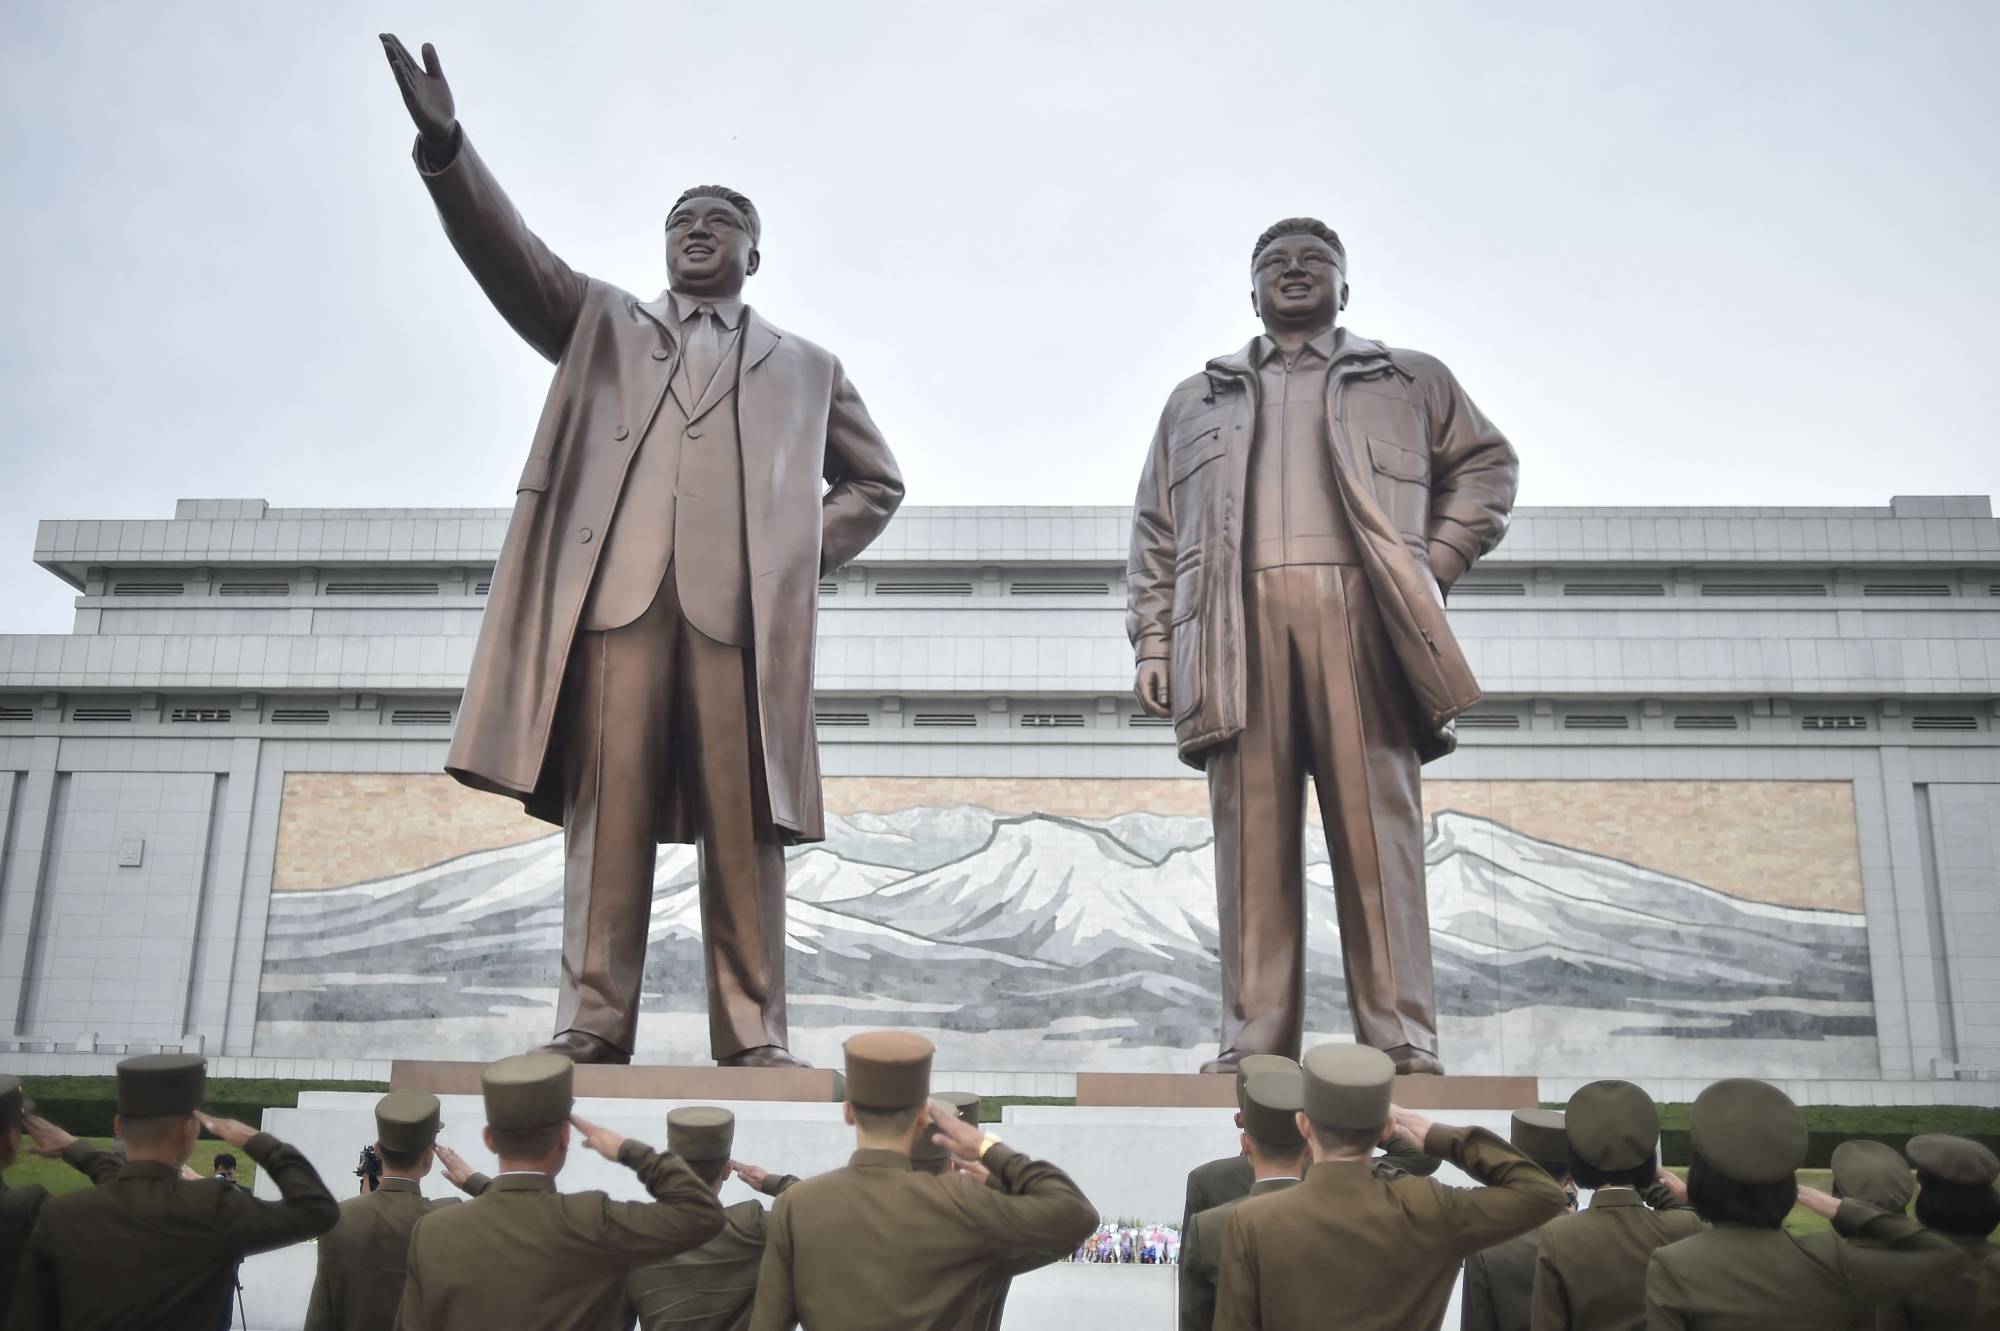 Korean People's Army personnel pay their respects before the statues of late North Korean leaders Kim Il Sung and Kim Jong Il at Mansu Hill in Pyongyang on Aug. 25. | AFP-JIJI